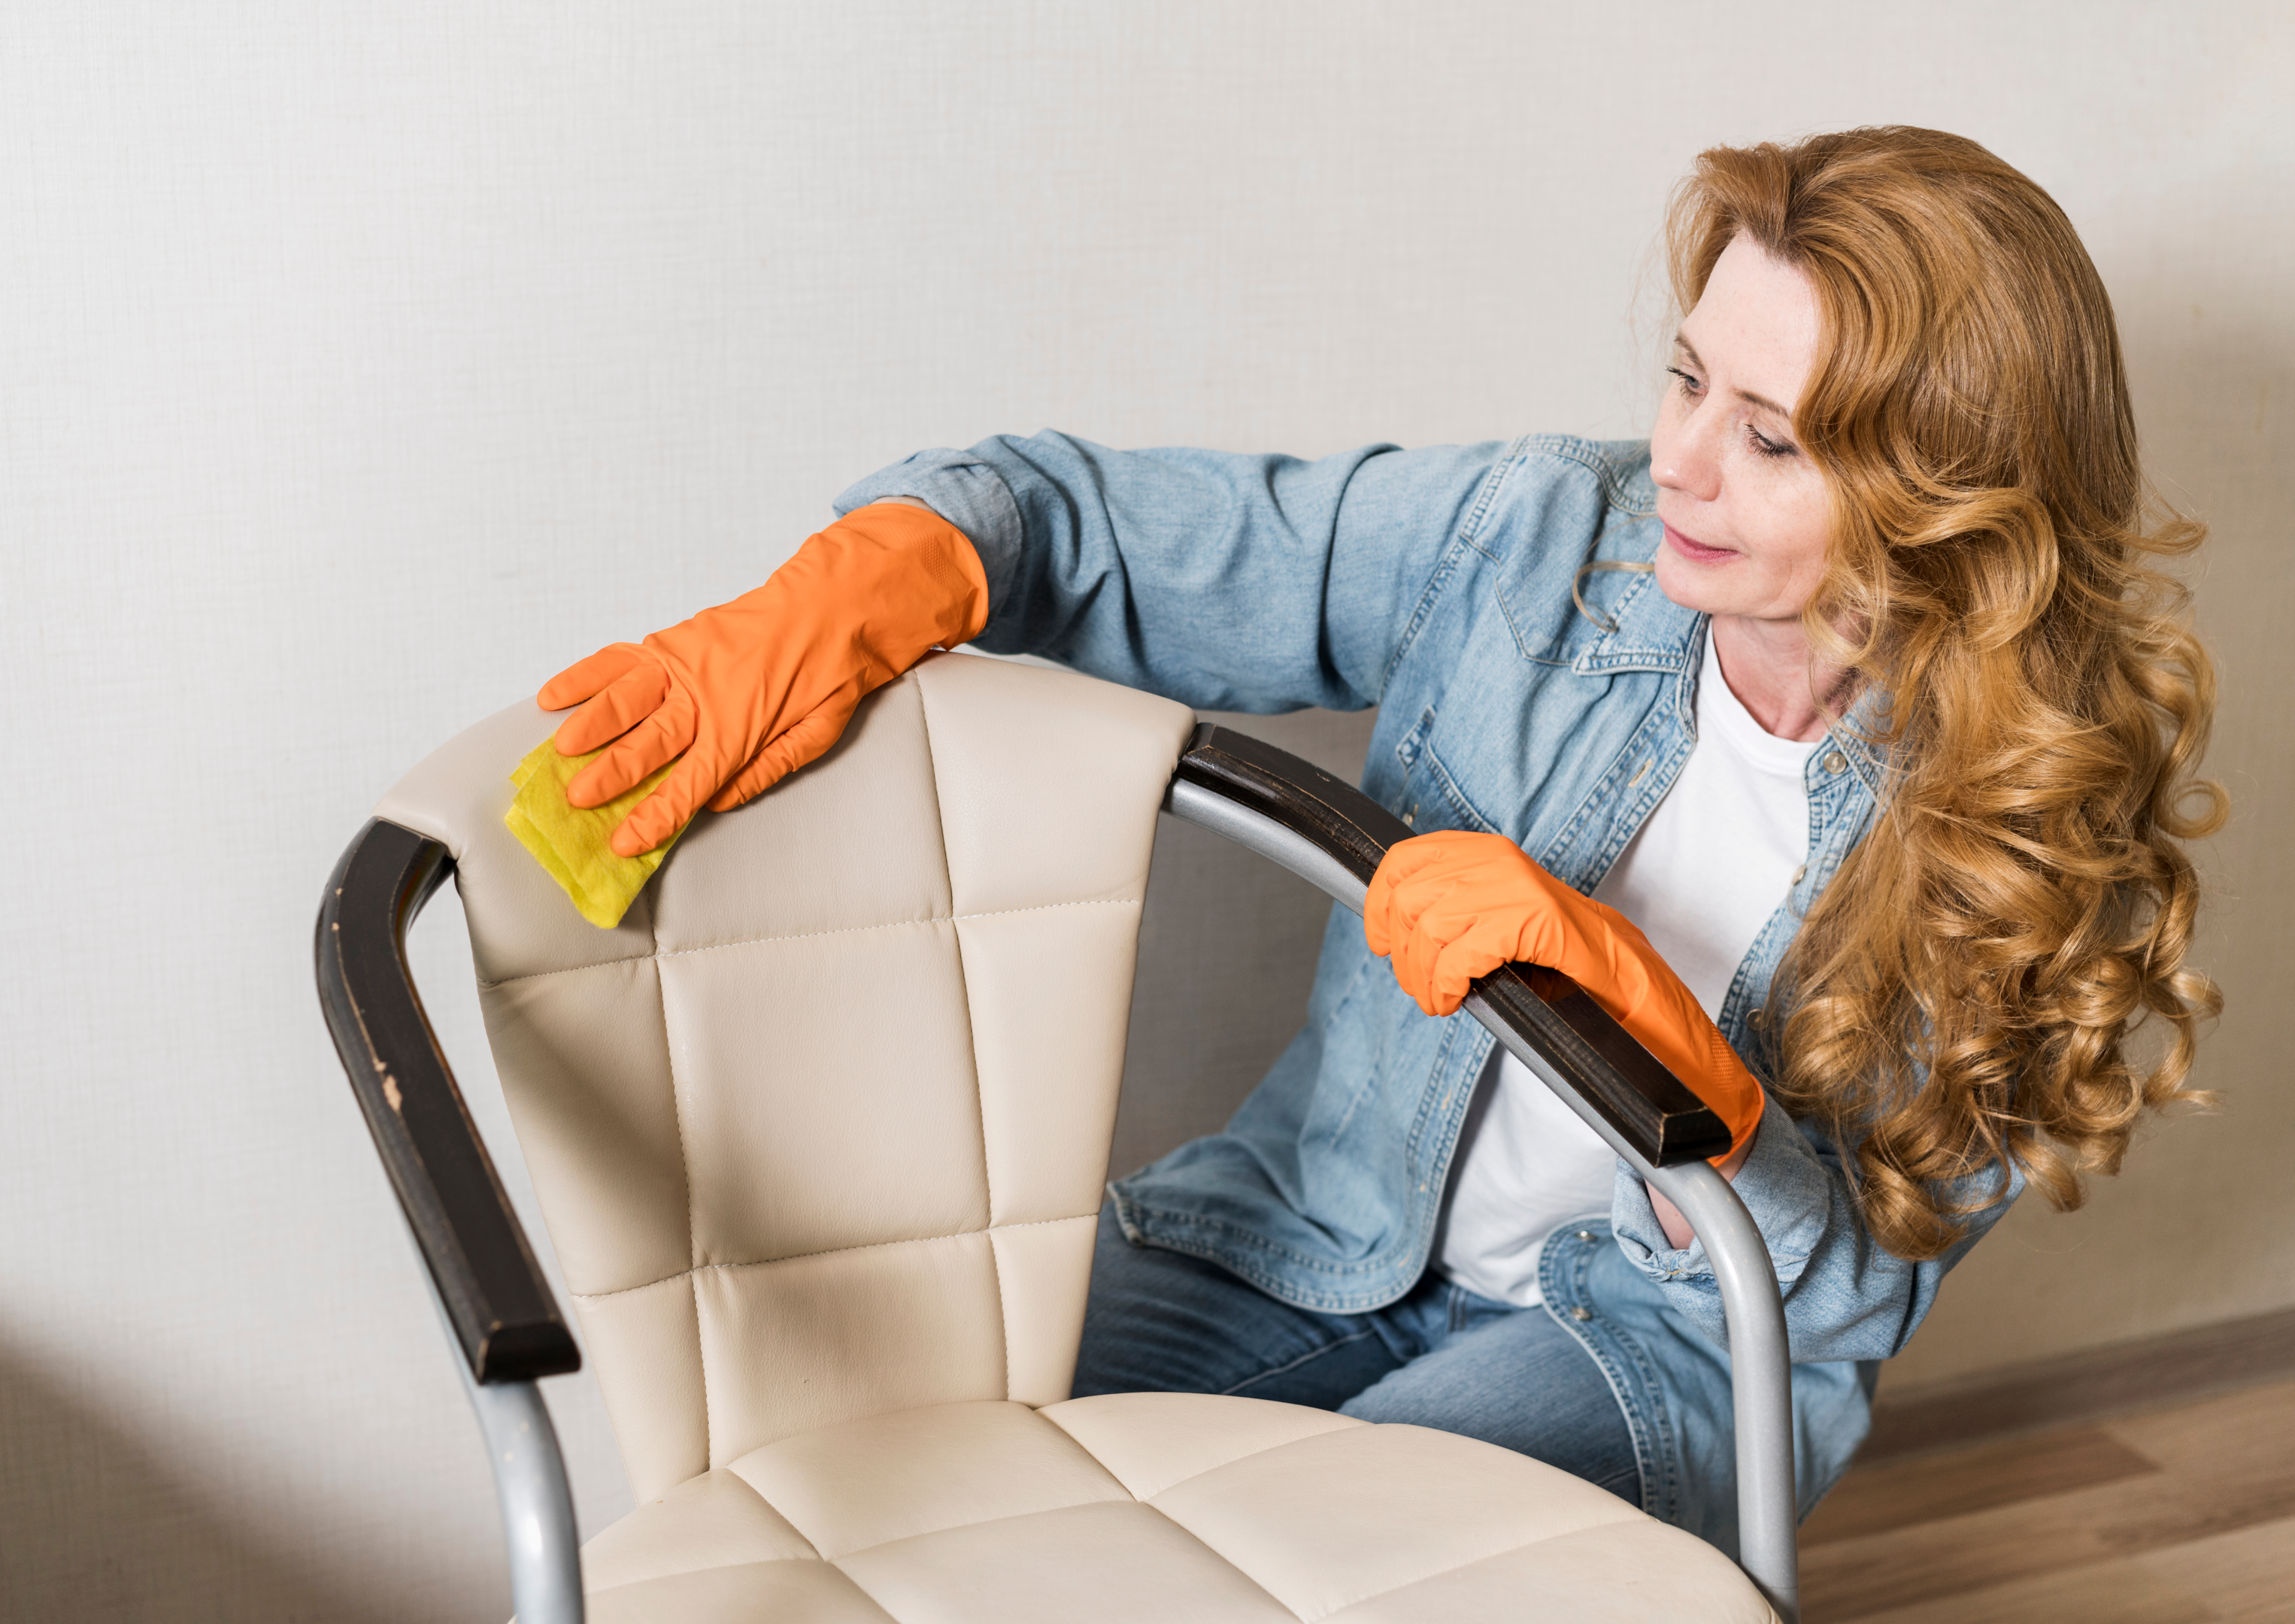 A person spot cleaning a stain on an upholstered sofa